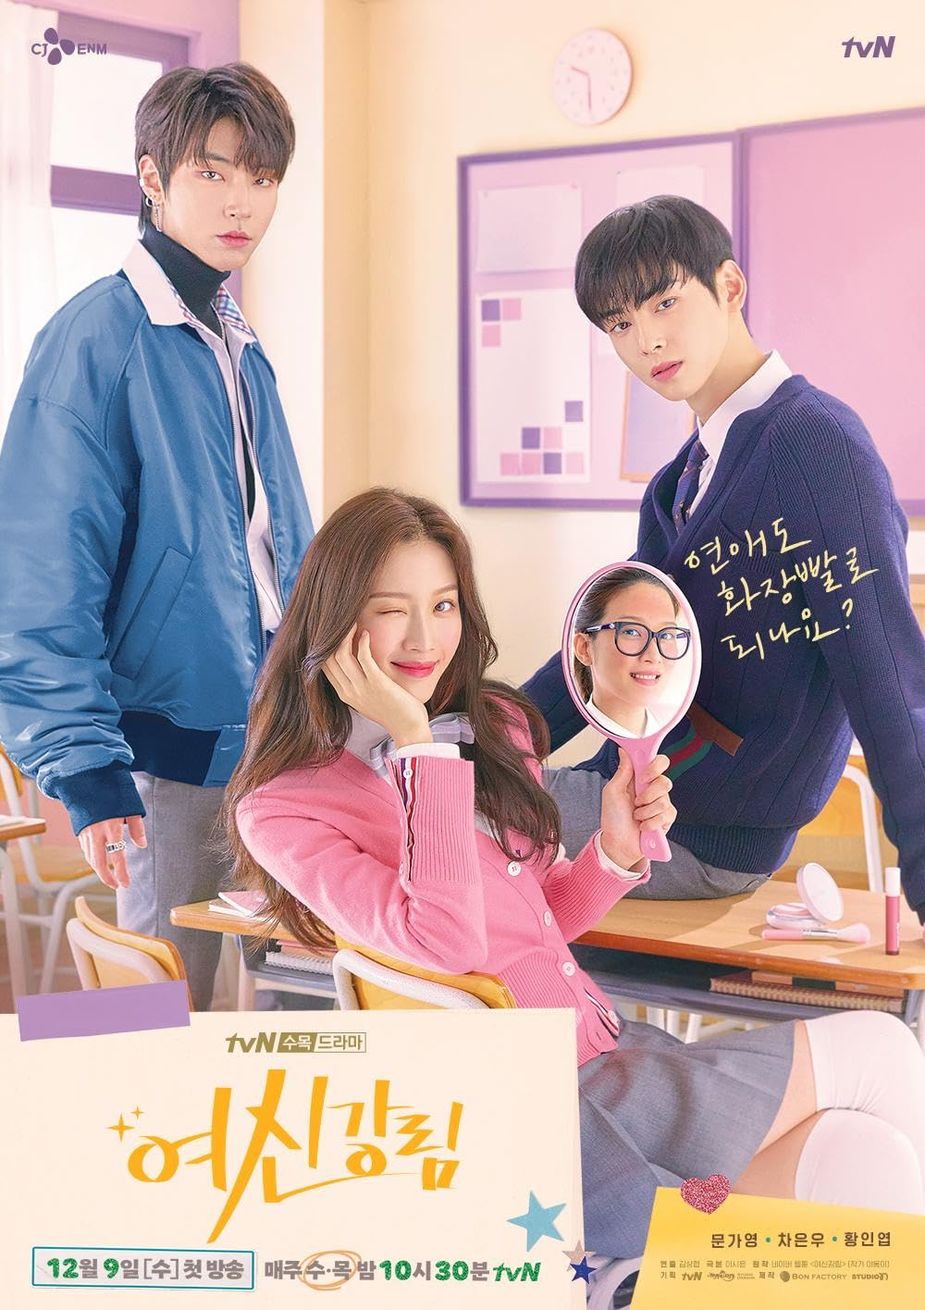 “True Beauty” ASTRO’s Cha Eunwoo And Moon Ga Young Reunite With An Explosion Of Visual Chemistry